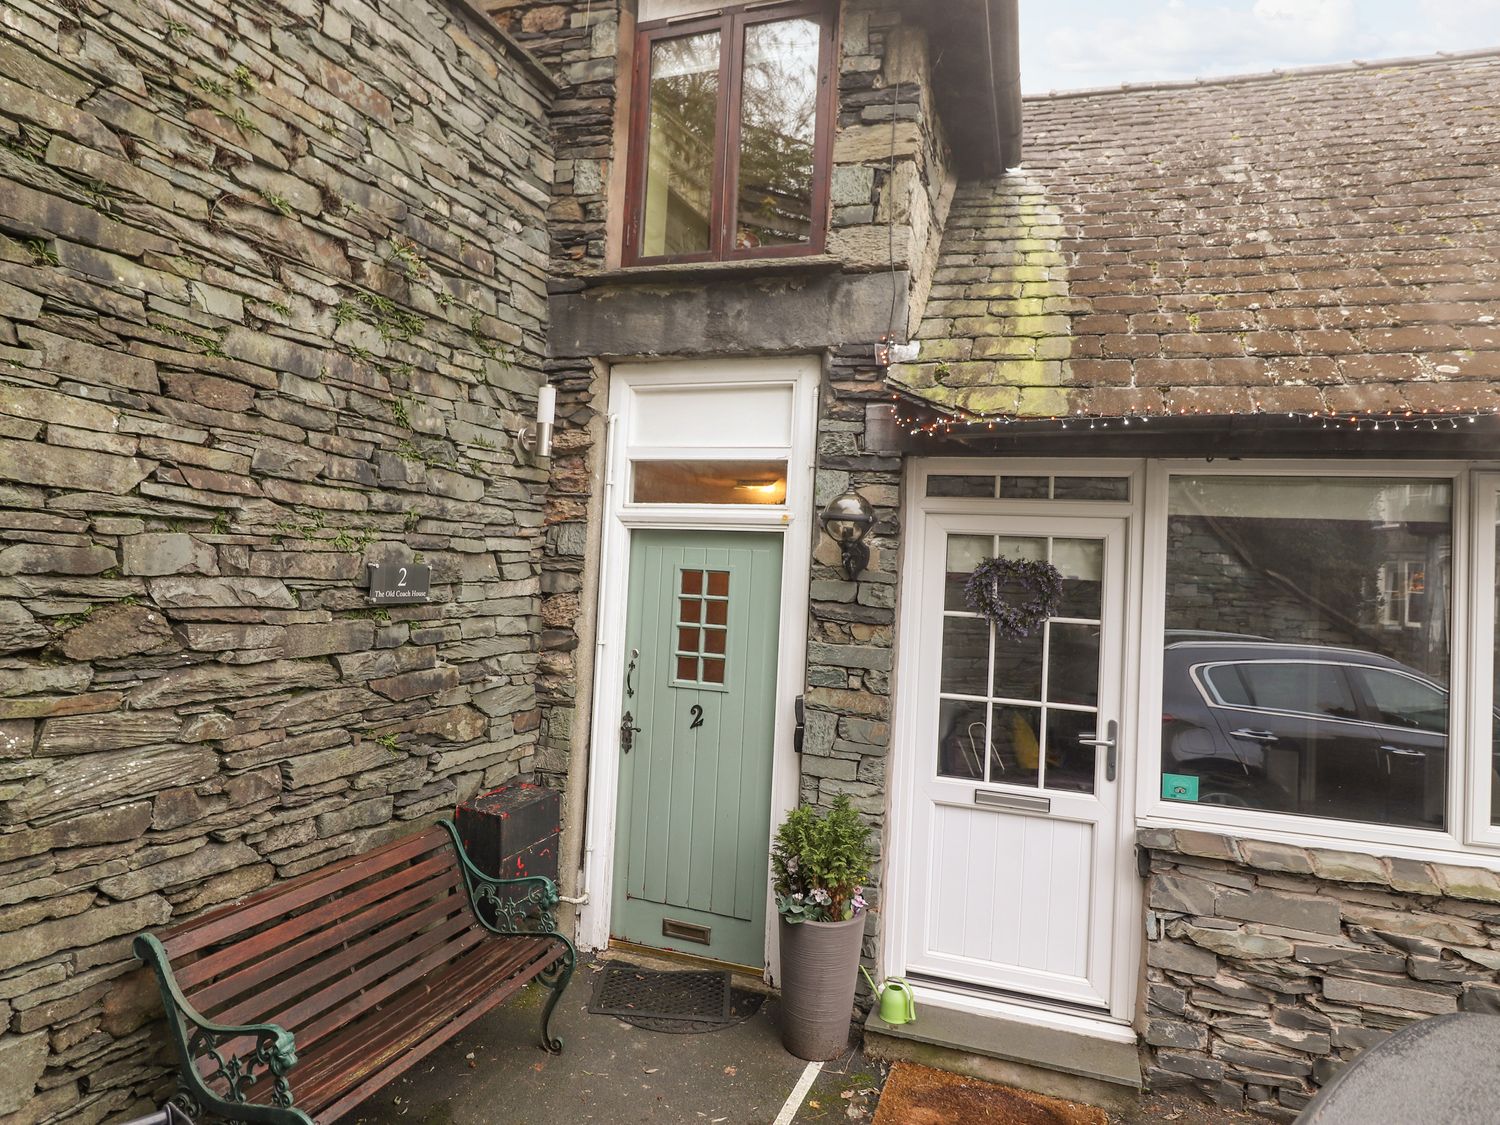 2 The Old Coach House - Lake District - 1089480 - photo 1